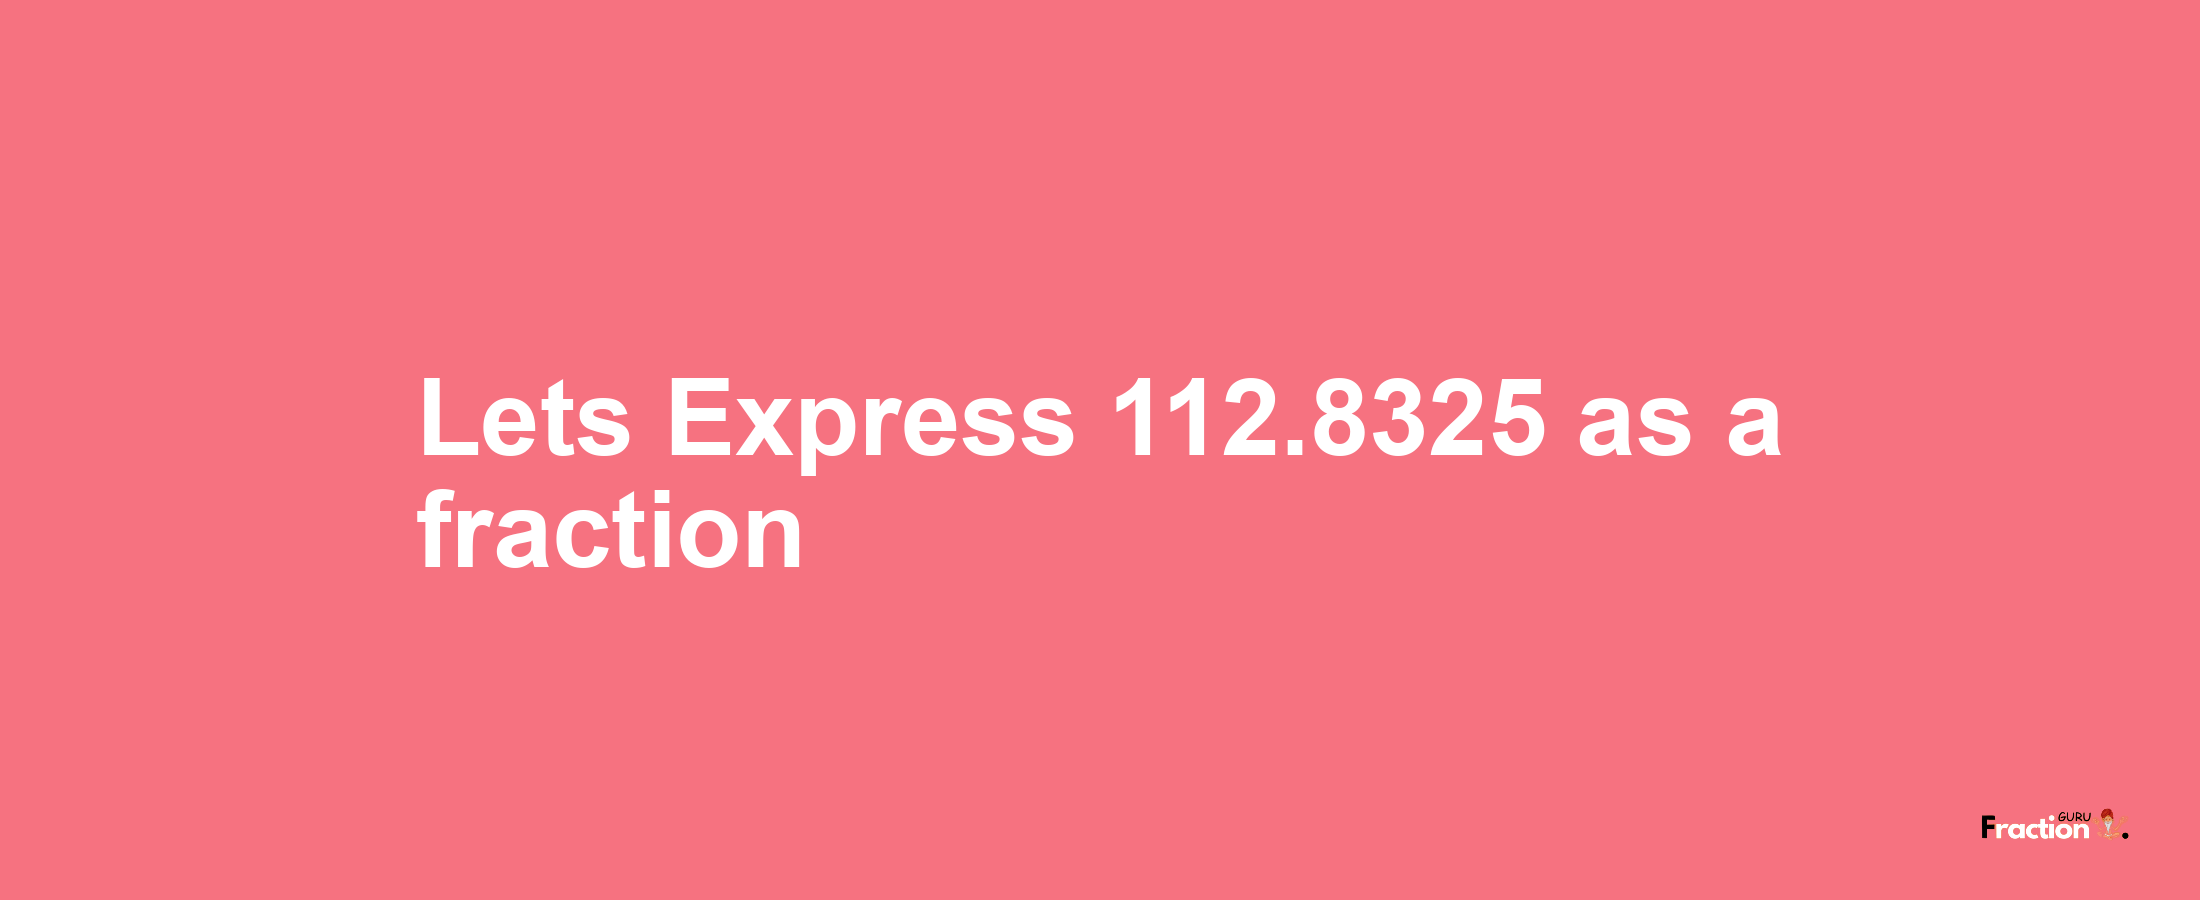 Lets Express 112.8325 as afraction